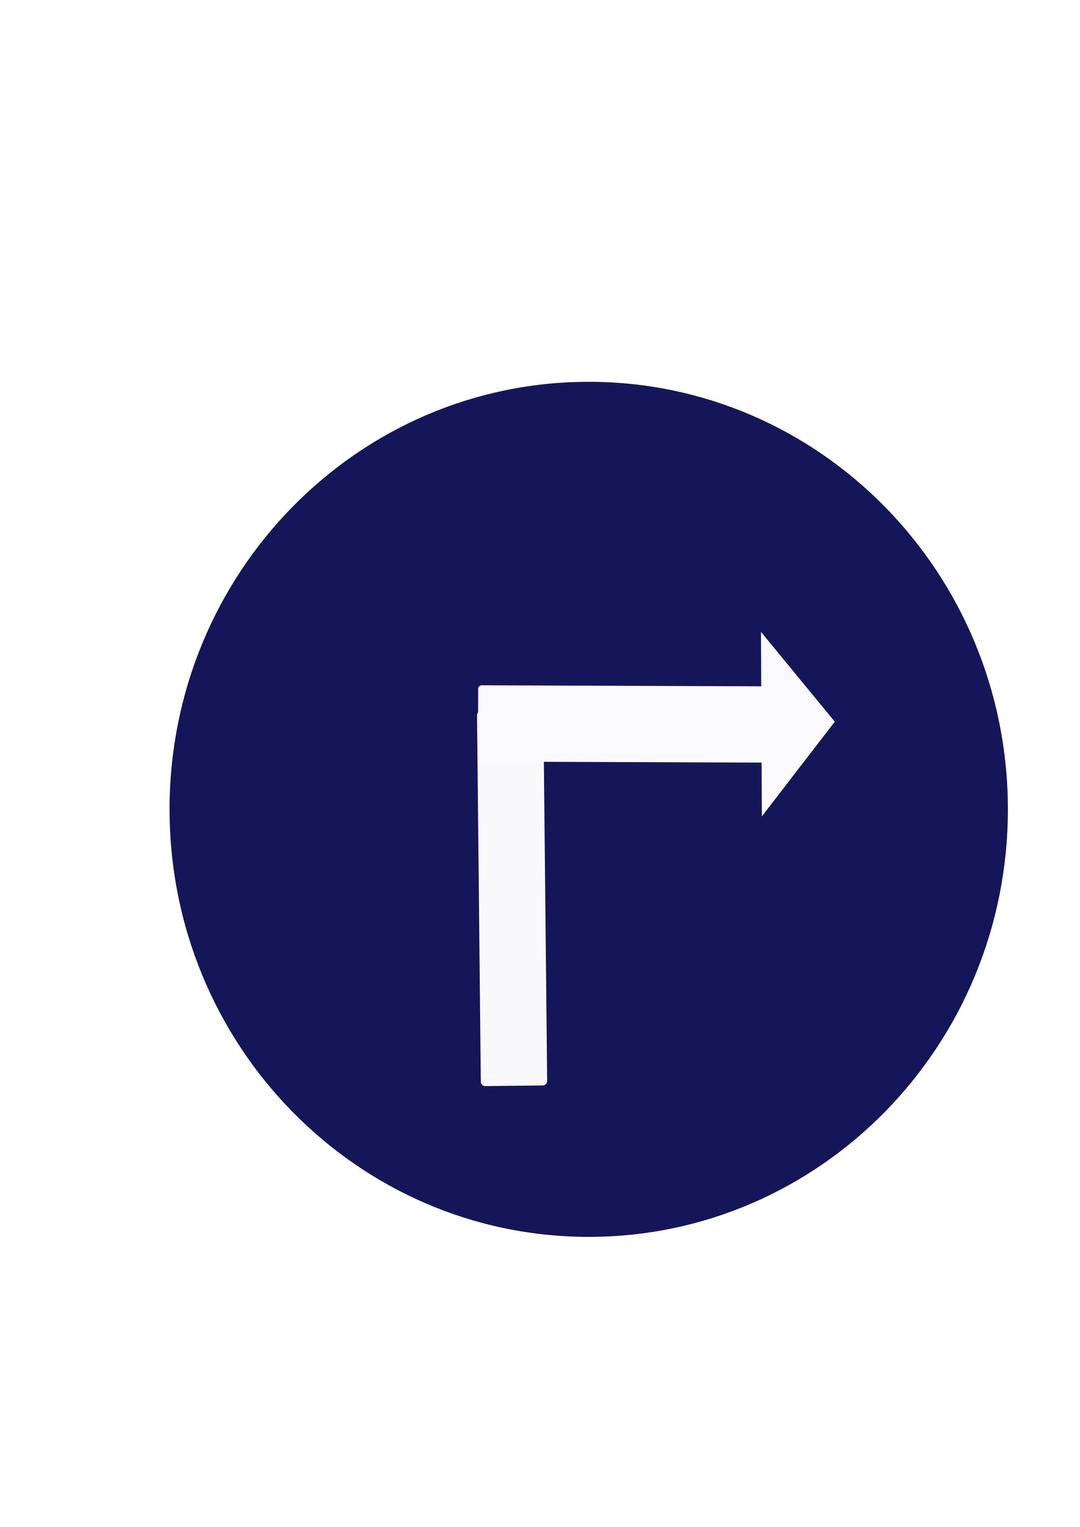 Indian road sign - Compulsory turn right png transparent